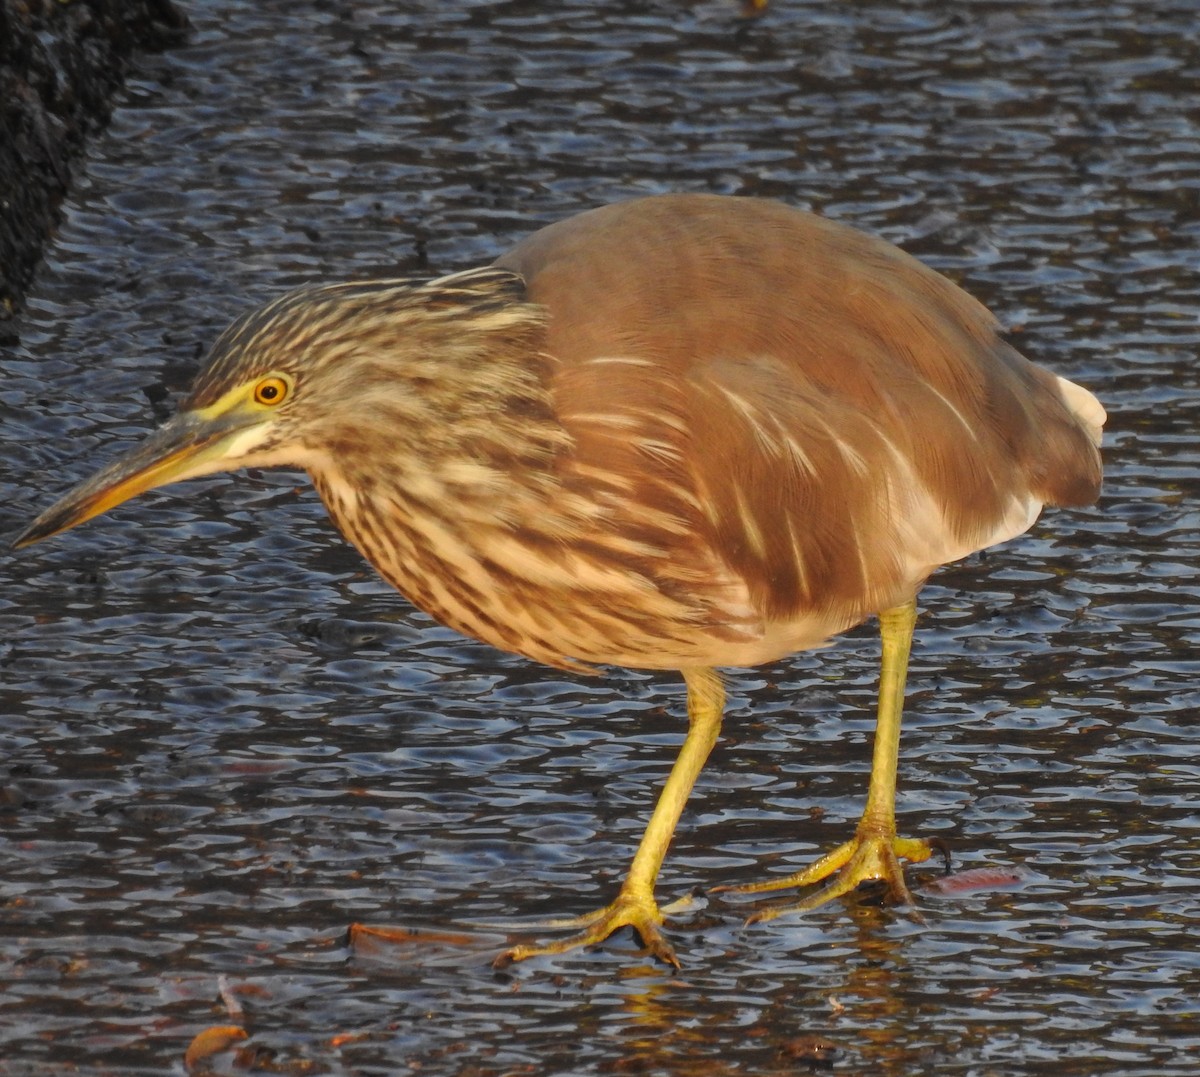 Chinese Pond-Heron - Troy Case